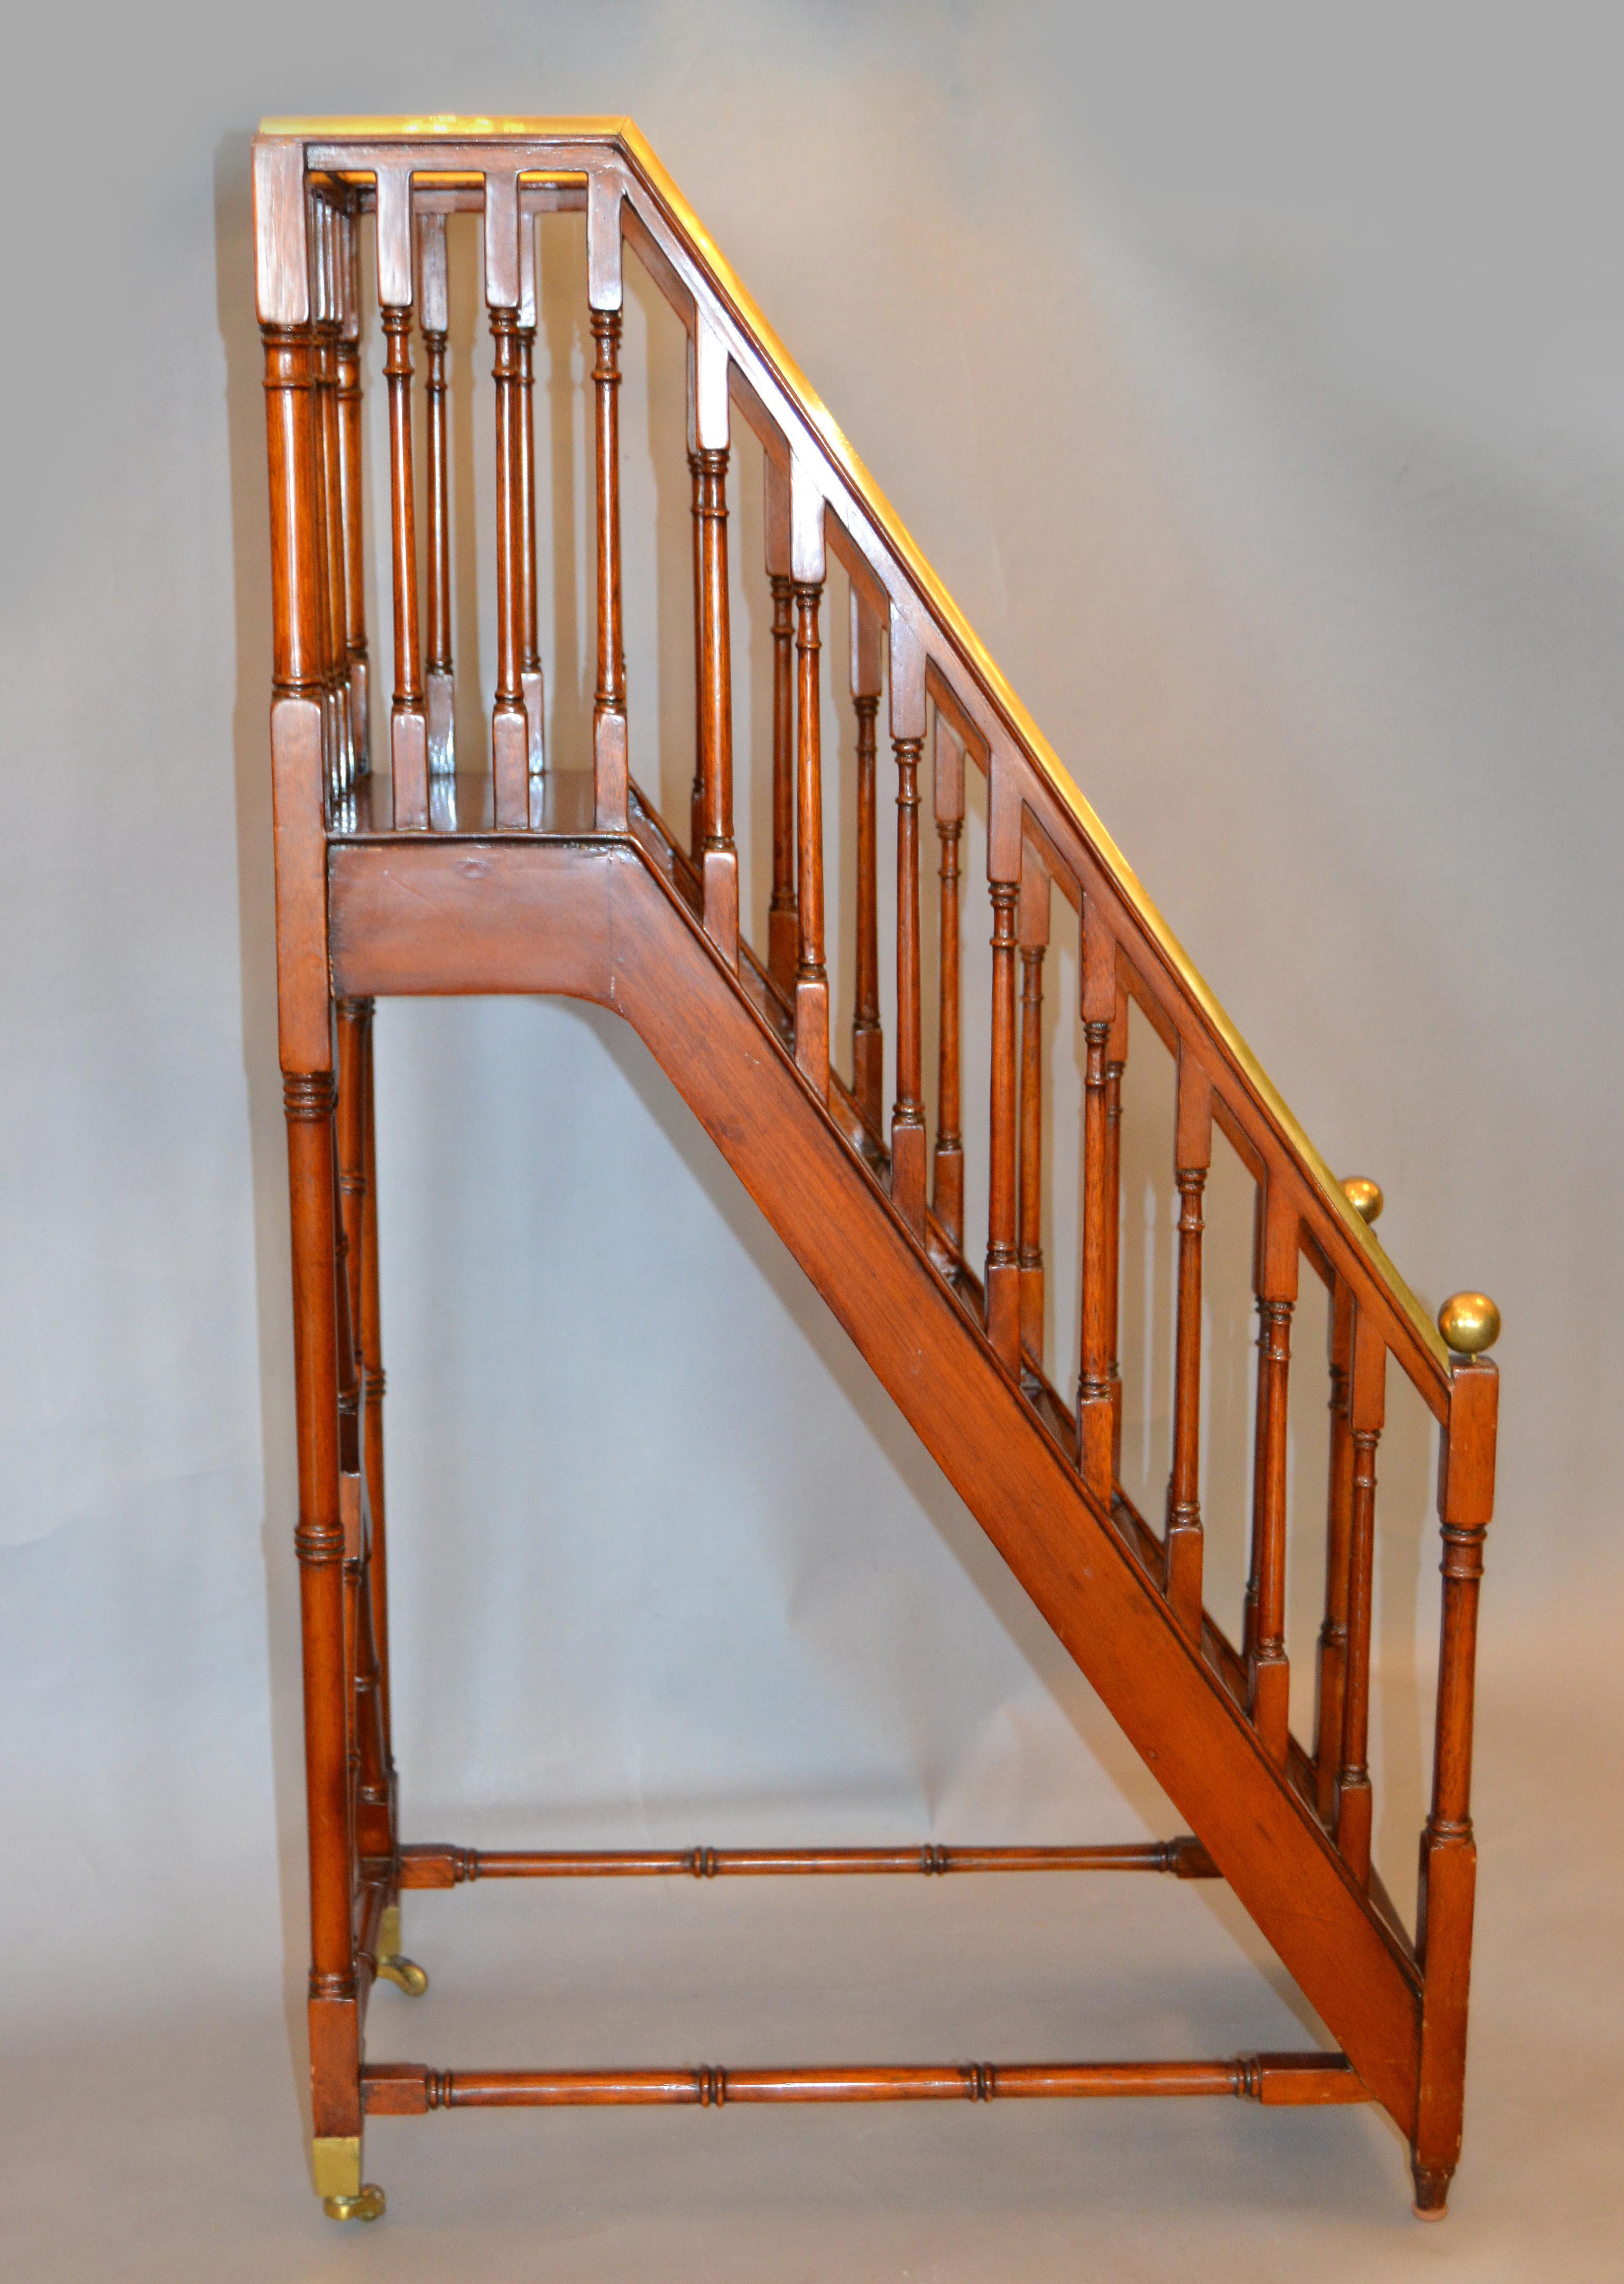 Traditional architectural decorative in walnut and brass library steps, ladder or stairs.
A very delicate quality handmade Walnut ladder with brass details.
The wheels to the front are an elegant and practical accessory.
         